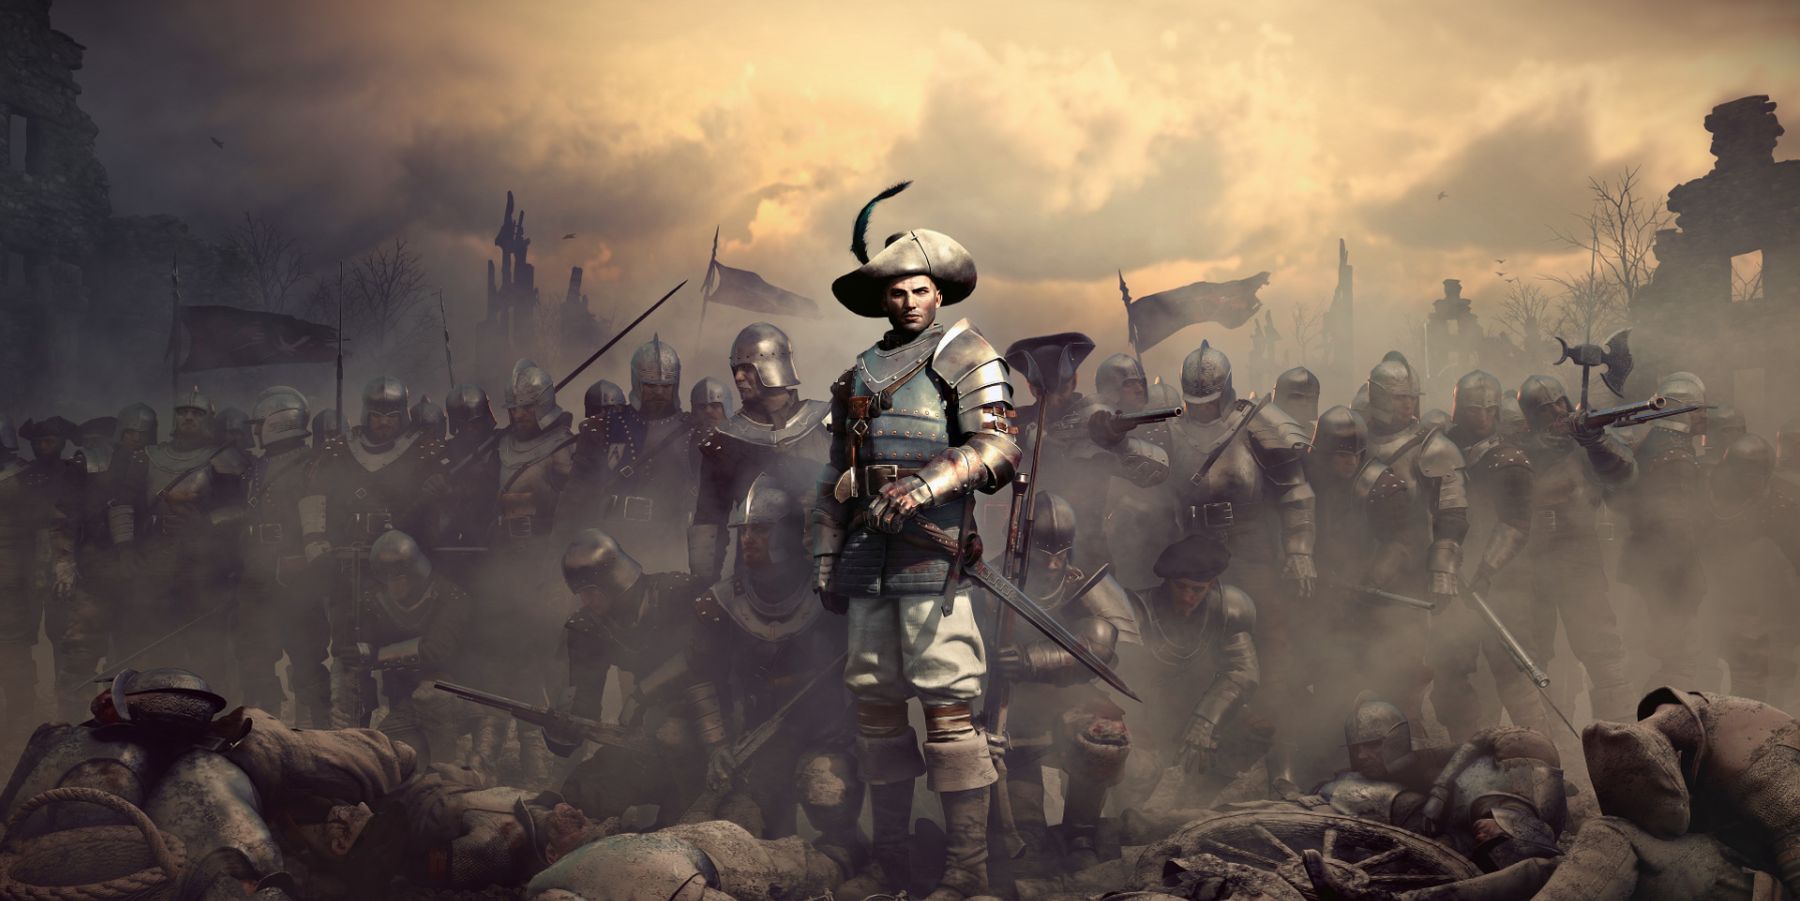 greedfall captain and guard standing after battle